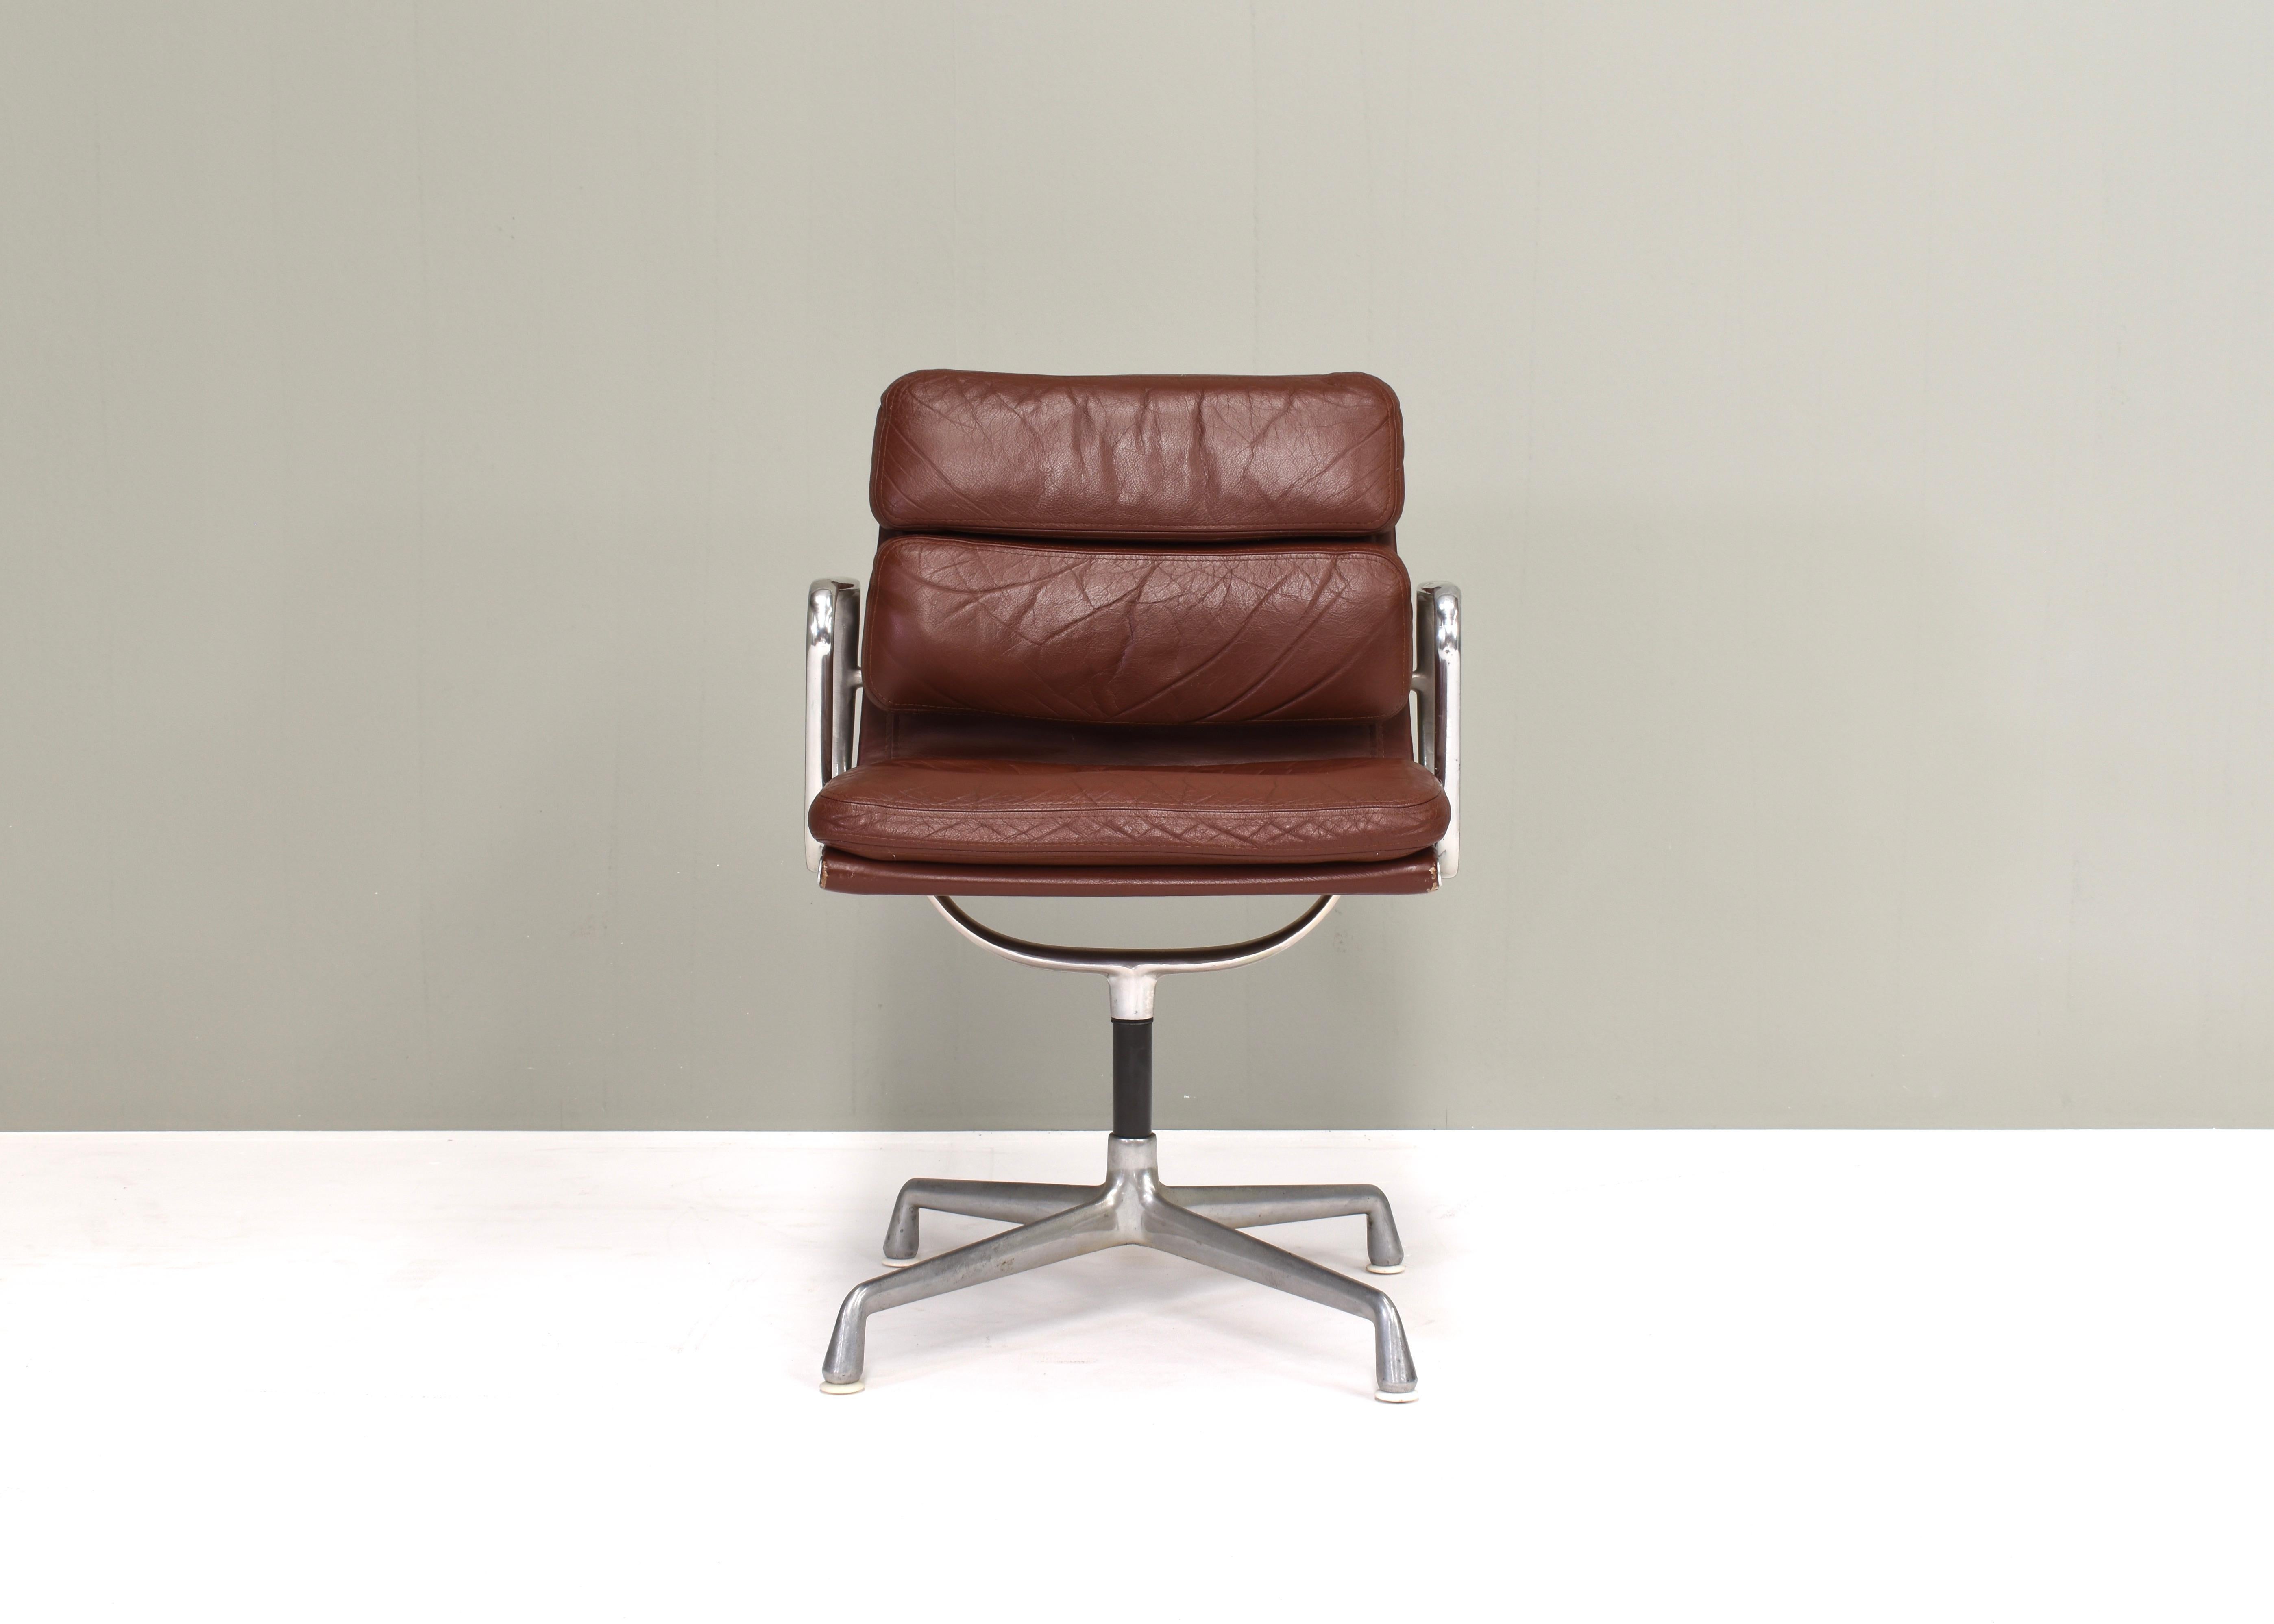 Stunning Eames EA208 aluminum series softpad chair in tan leather. The chair was produced in the 1970’s but still looks amazing. The chrome shows some signs of use in the manor of minor damages and scratching. The leather has age patina and still is